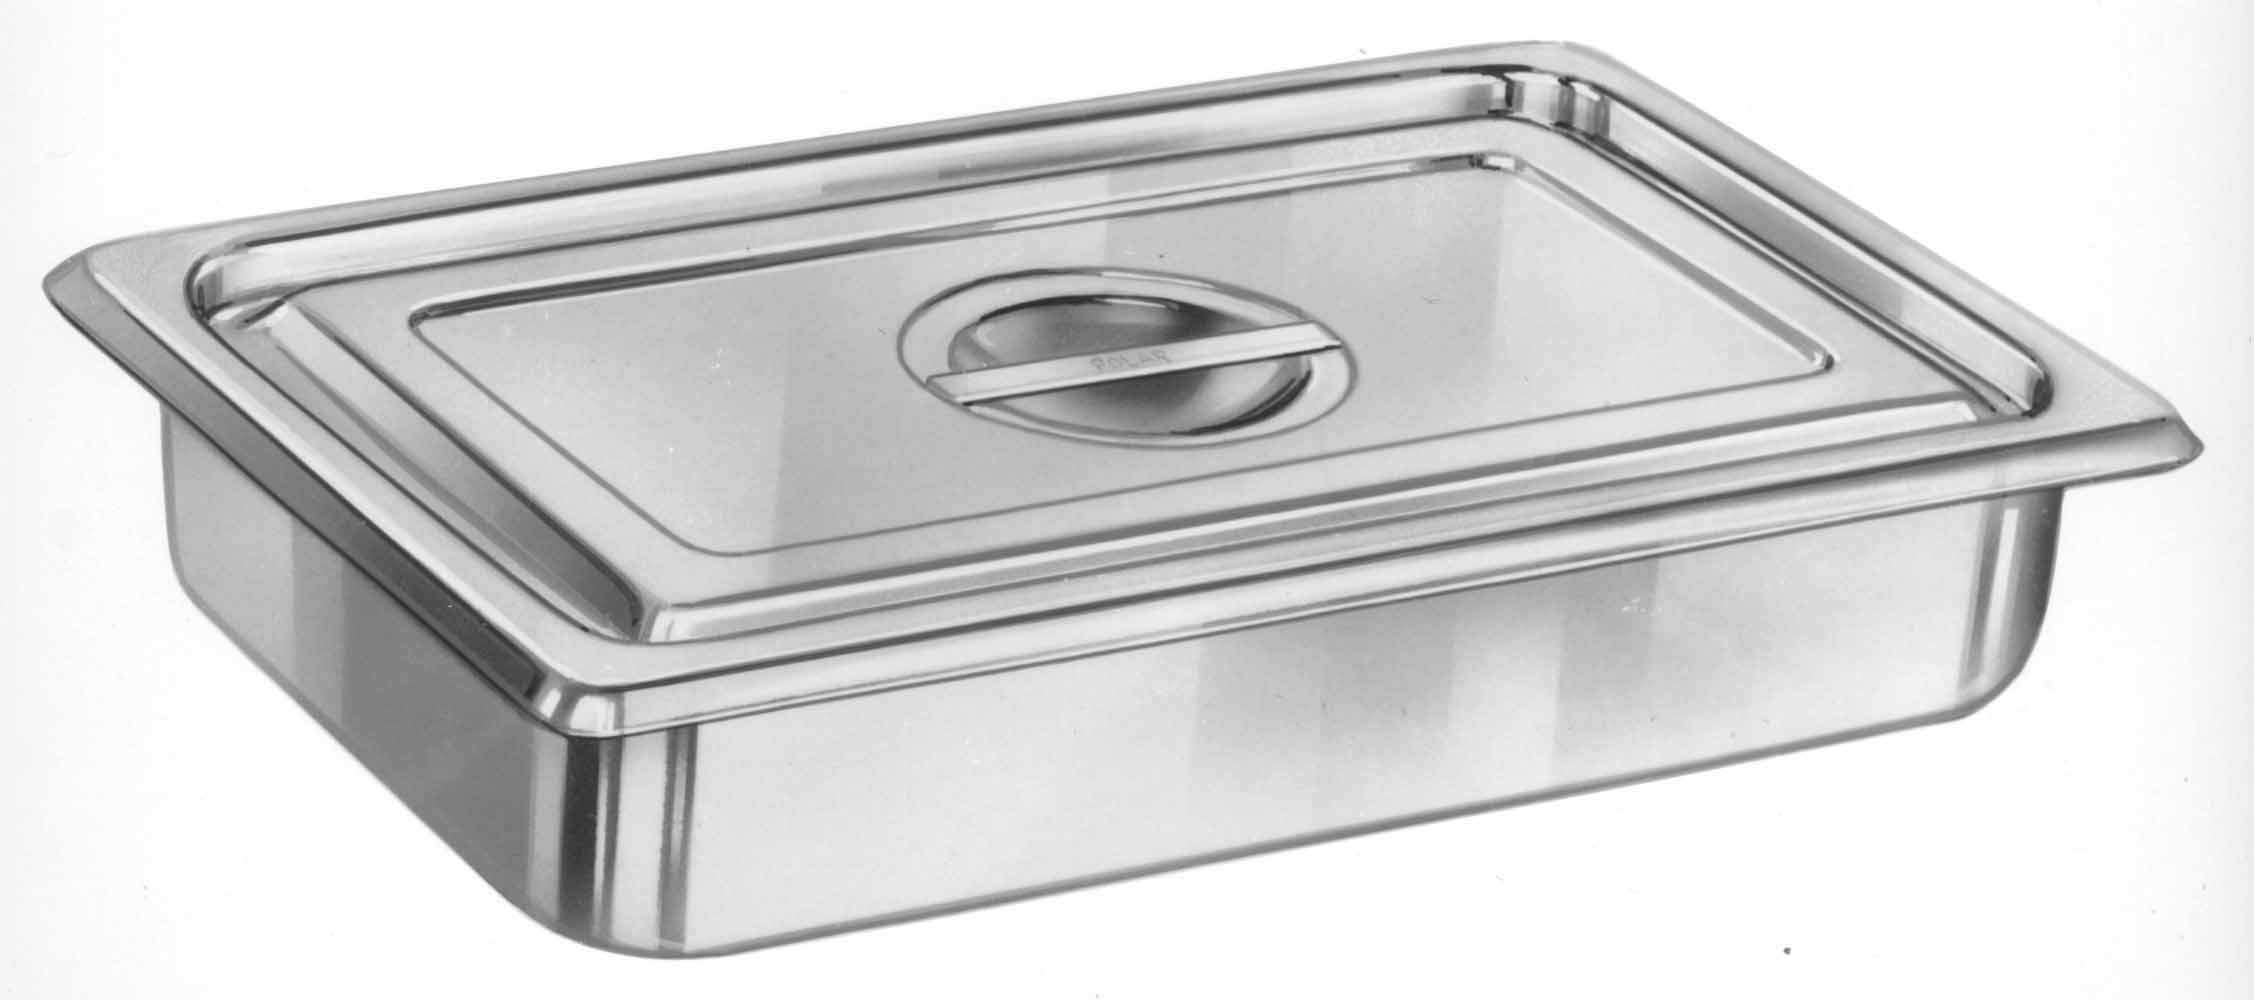 Instrument Tray W/ Flat Cover, Flat Cover For #193-9301 & #193-9302